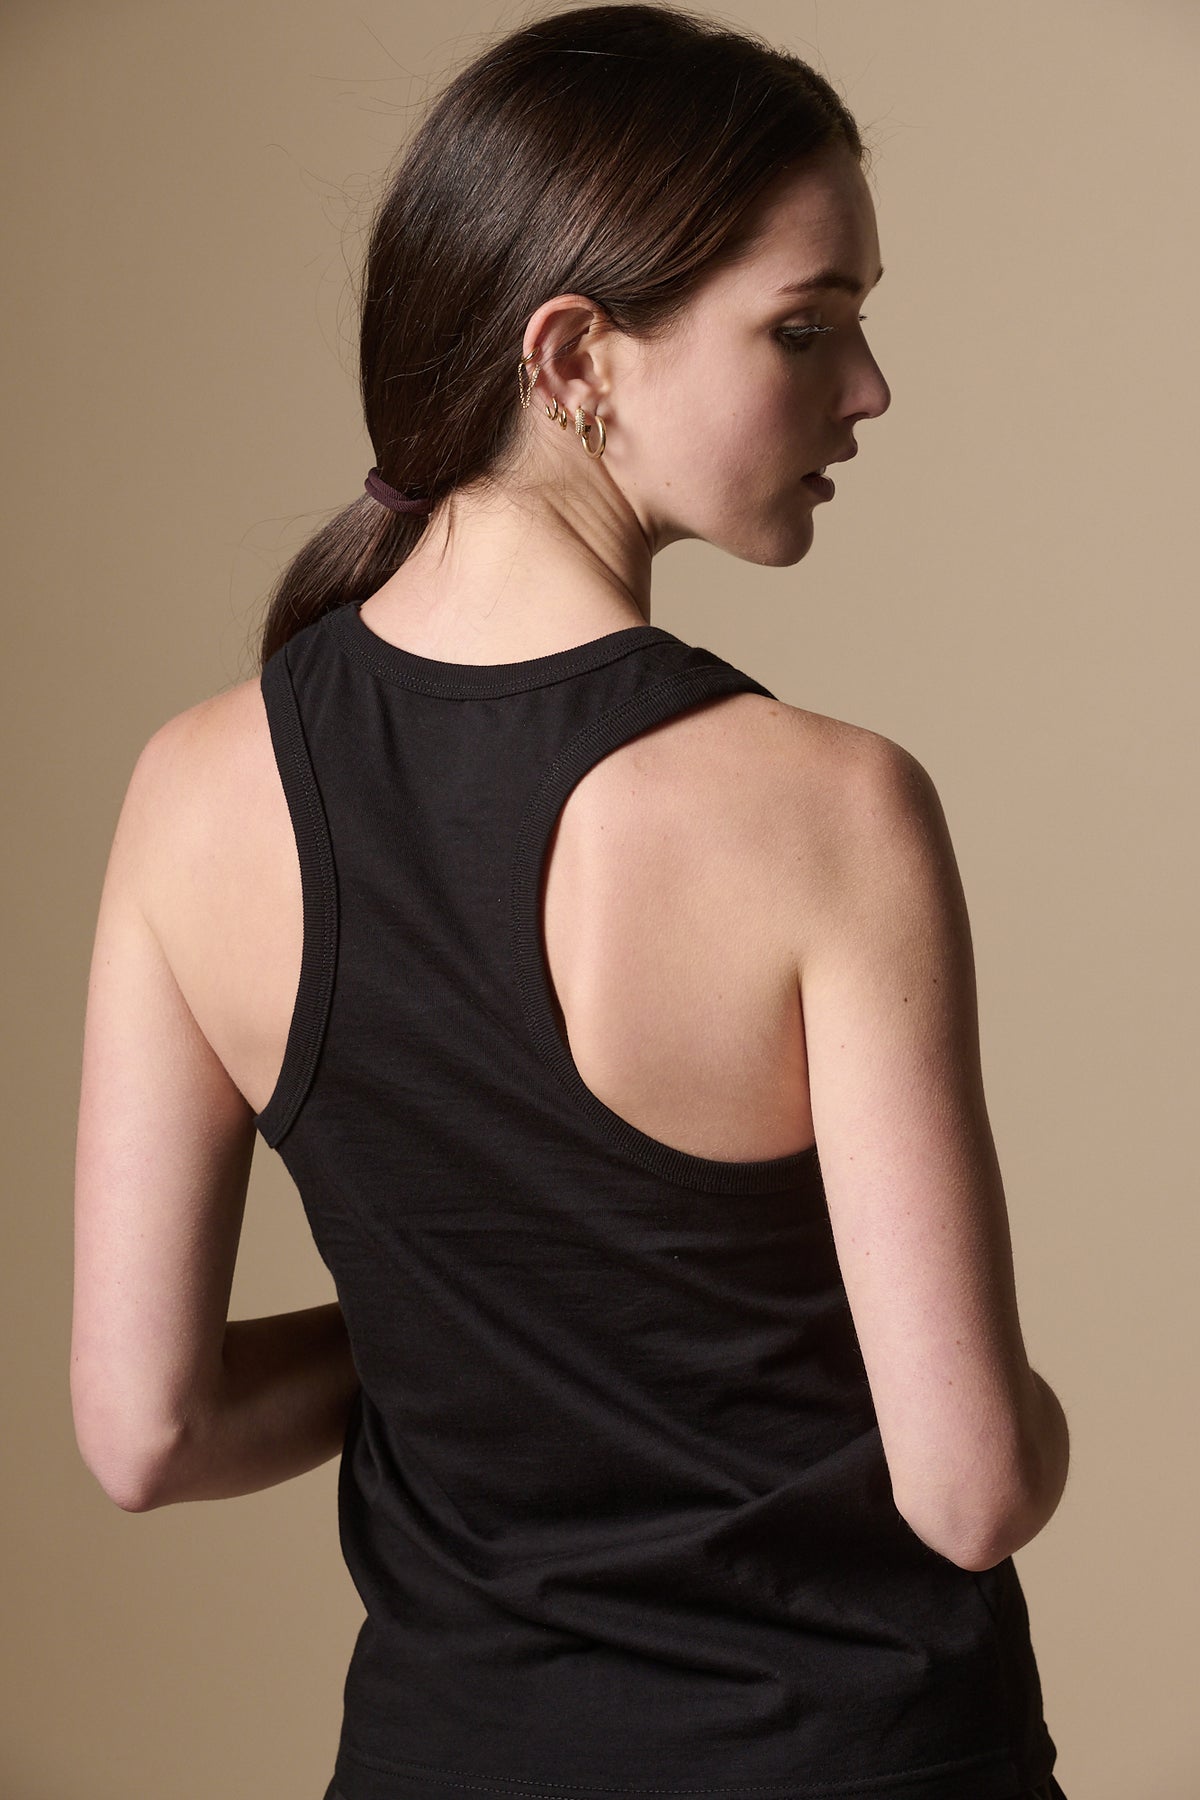 
            Image shows the back of white female with brunette hair in ponytail, wearing racer back vest plastic free in black.